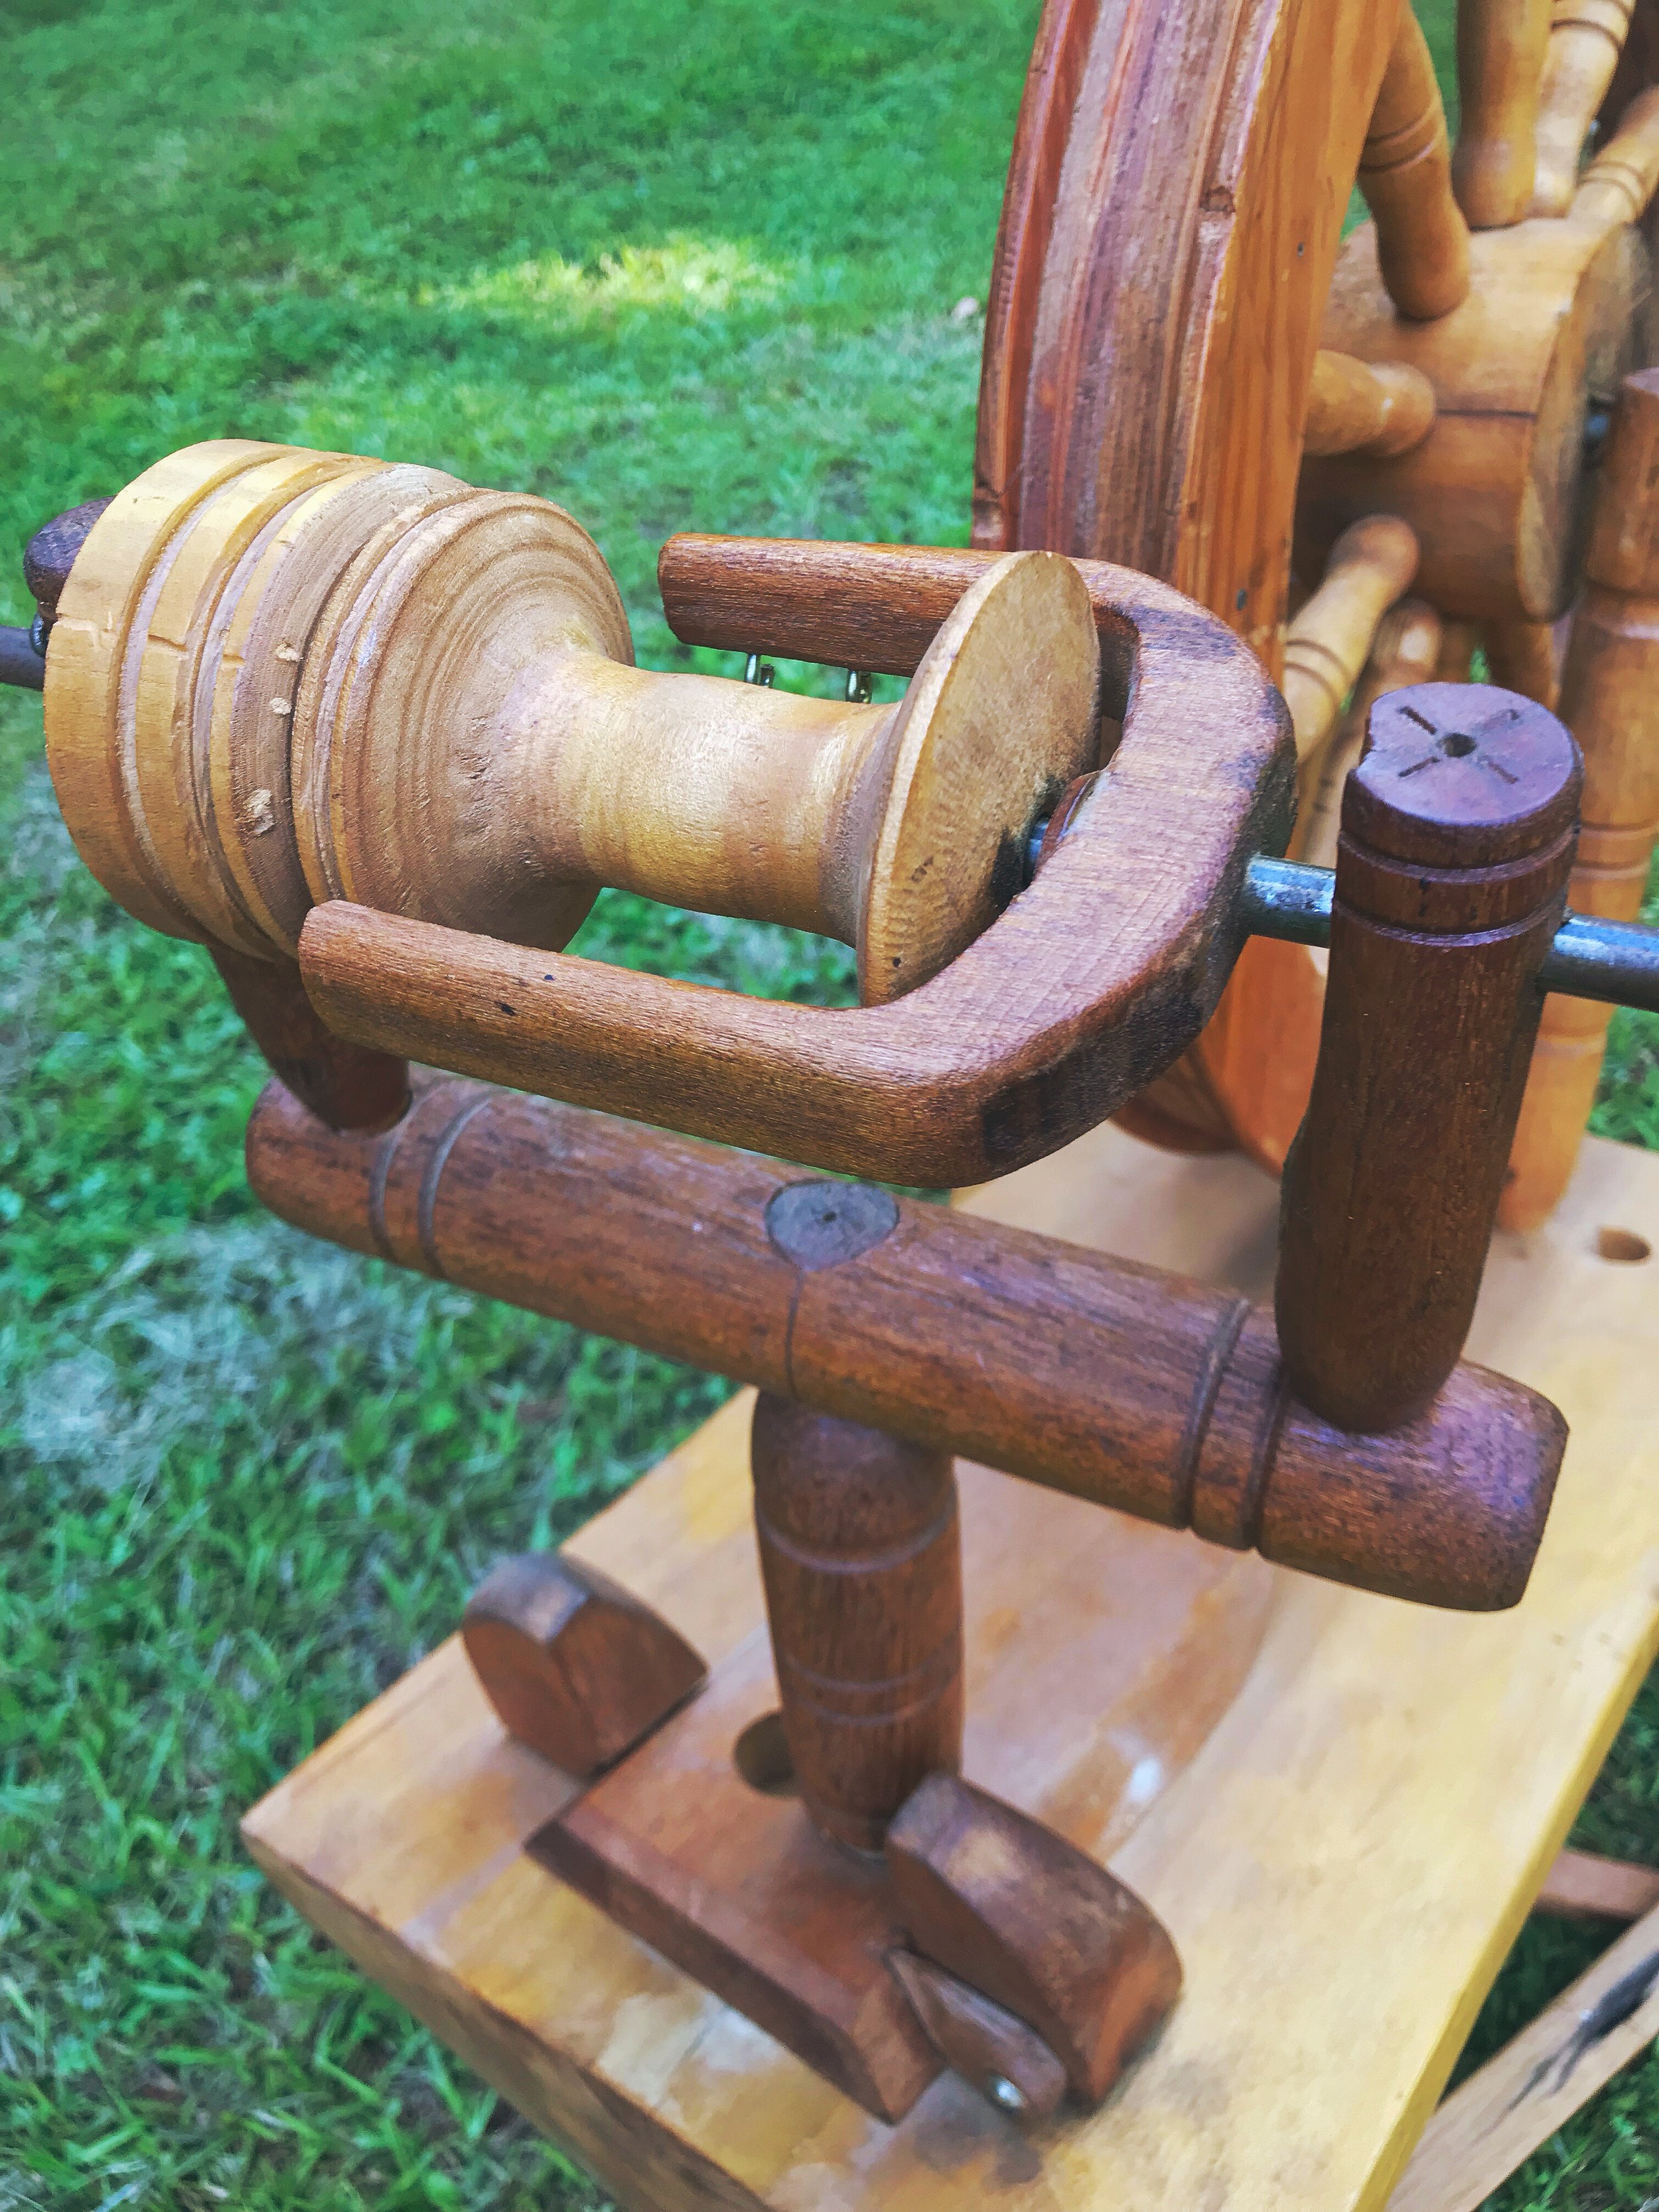 How I Restored an Antique Spinning Wheel: Part 2